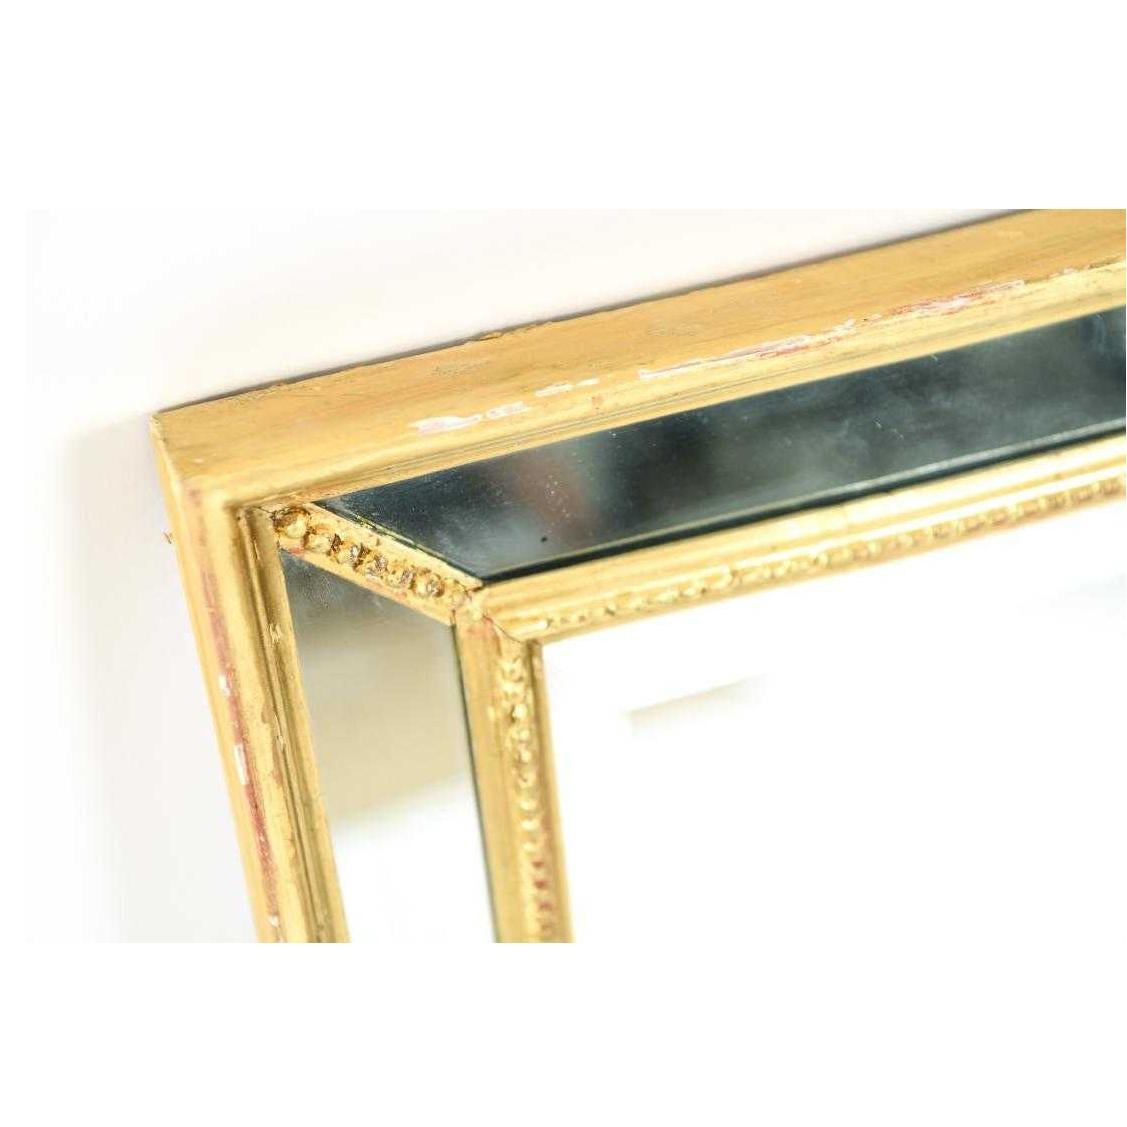 Gilt faceted mirror with bead detail. Measure: 19